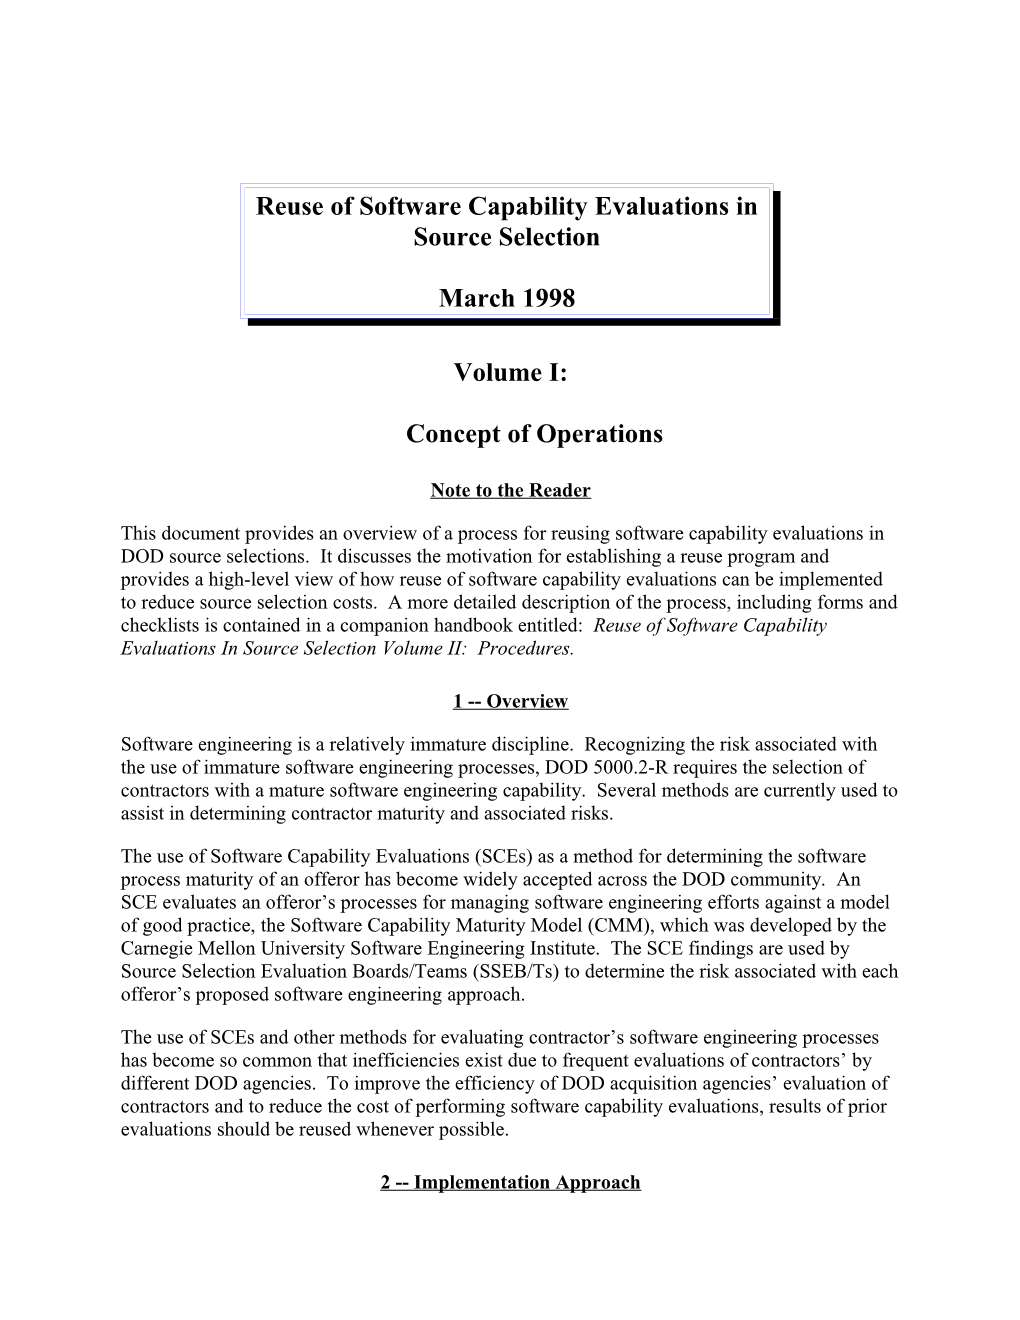 Reuse of Software Capability Evaluations in Source Selection